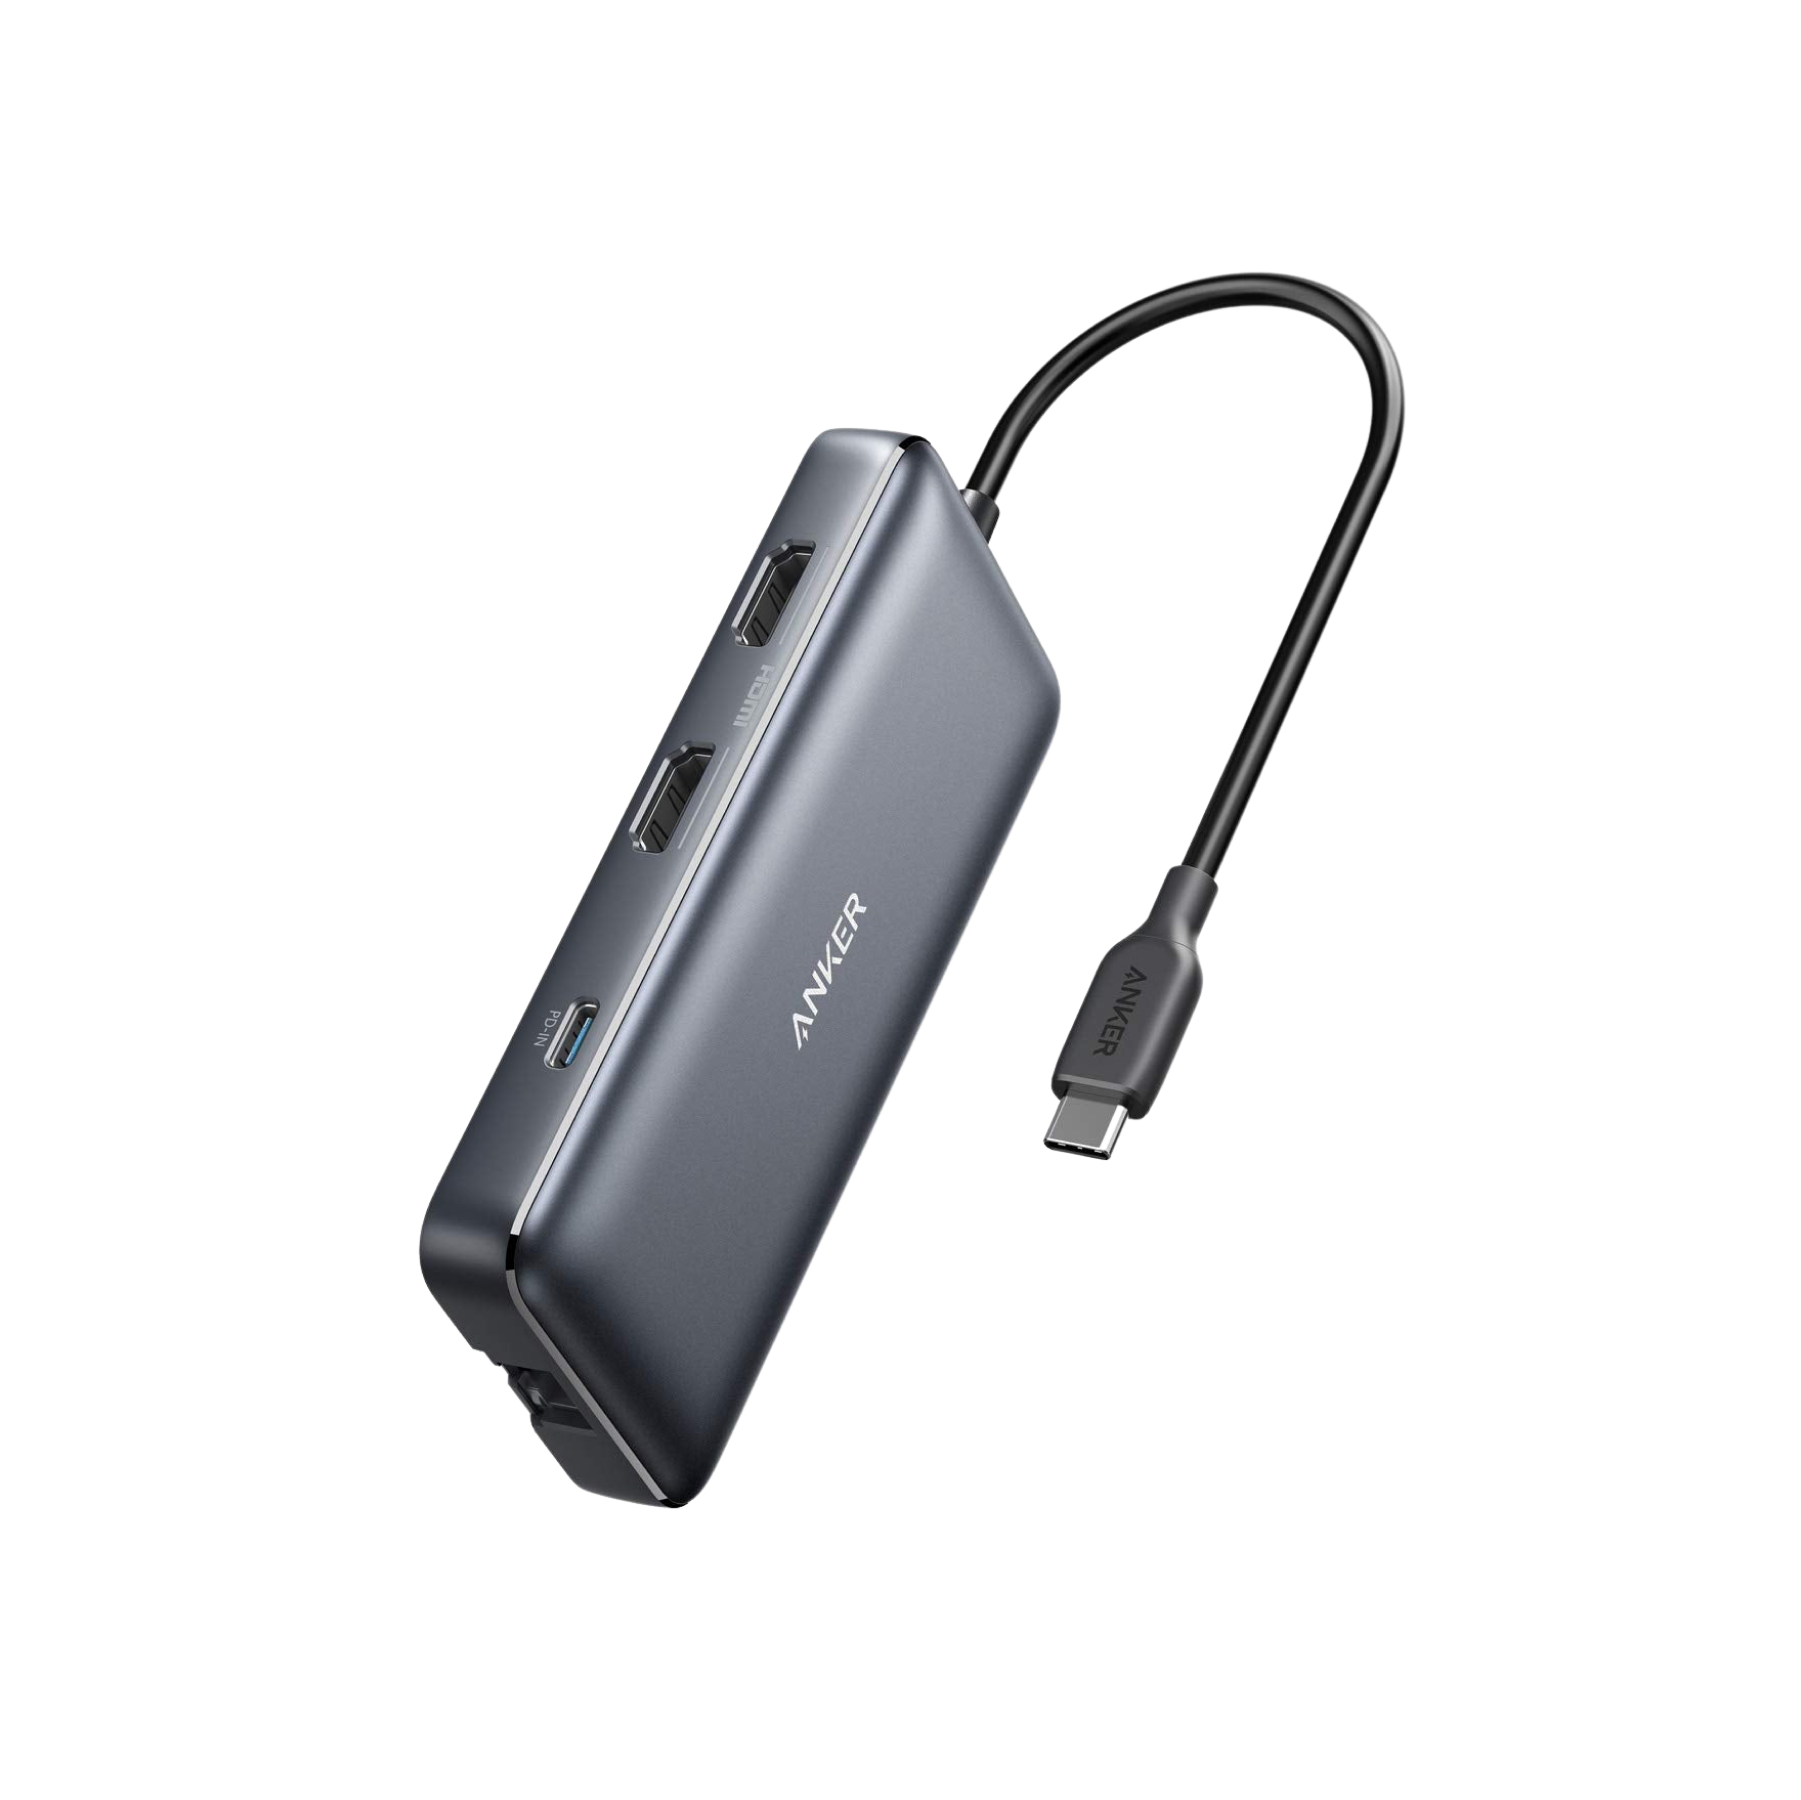 Anker Unveils Updated USB-C Nano and MagGo Qi2 Charging Accessories